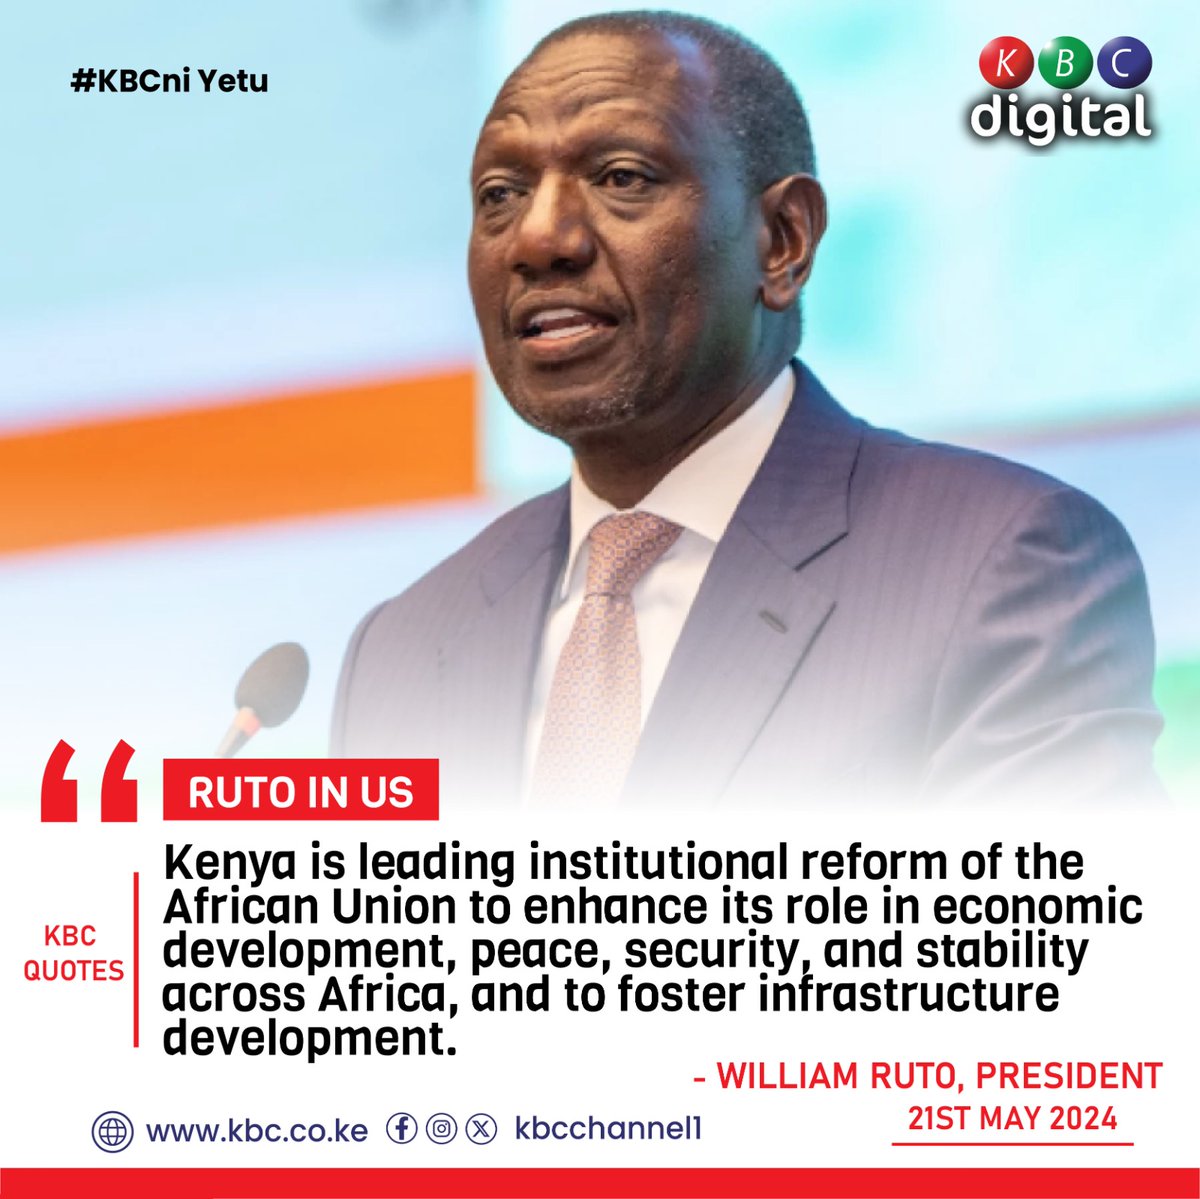 'Kenya is leading institutional reform of the African Union to enhance its role in economic development, peace, security, and stability across Africa, and to foster infrastructure development.' President William Ruto ^RO